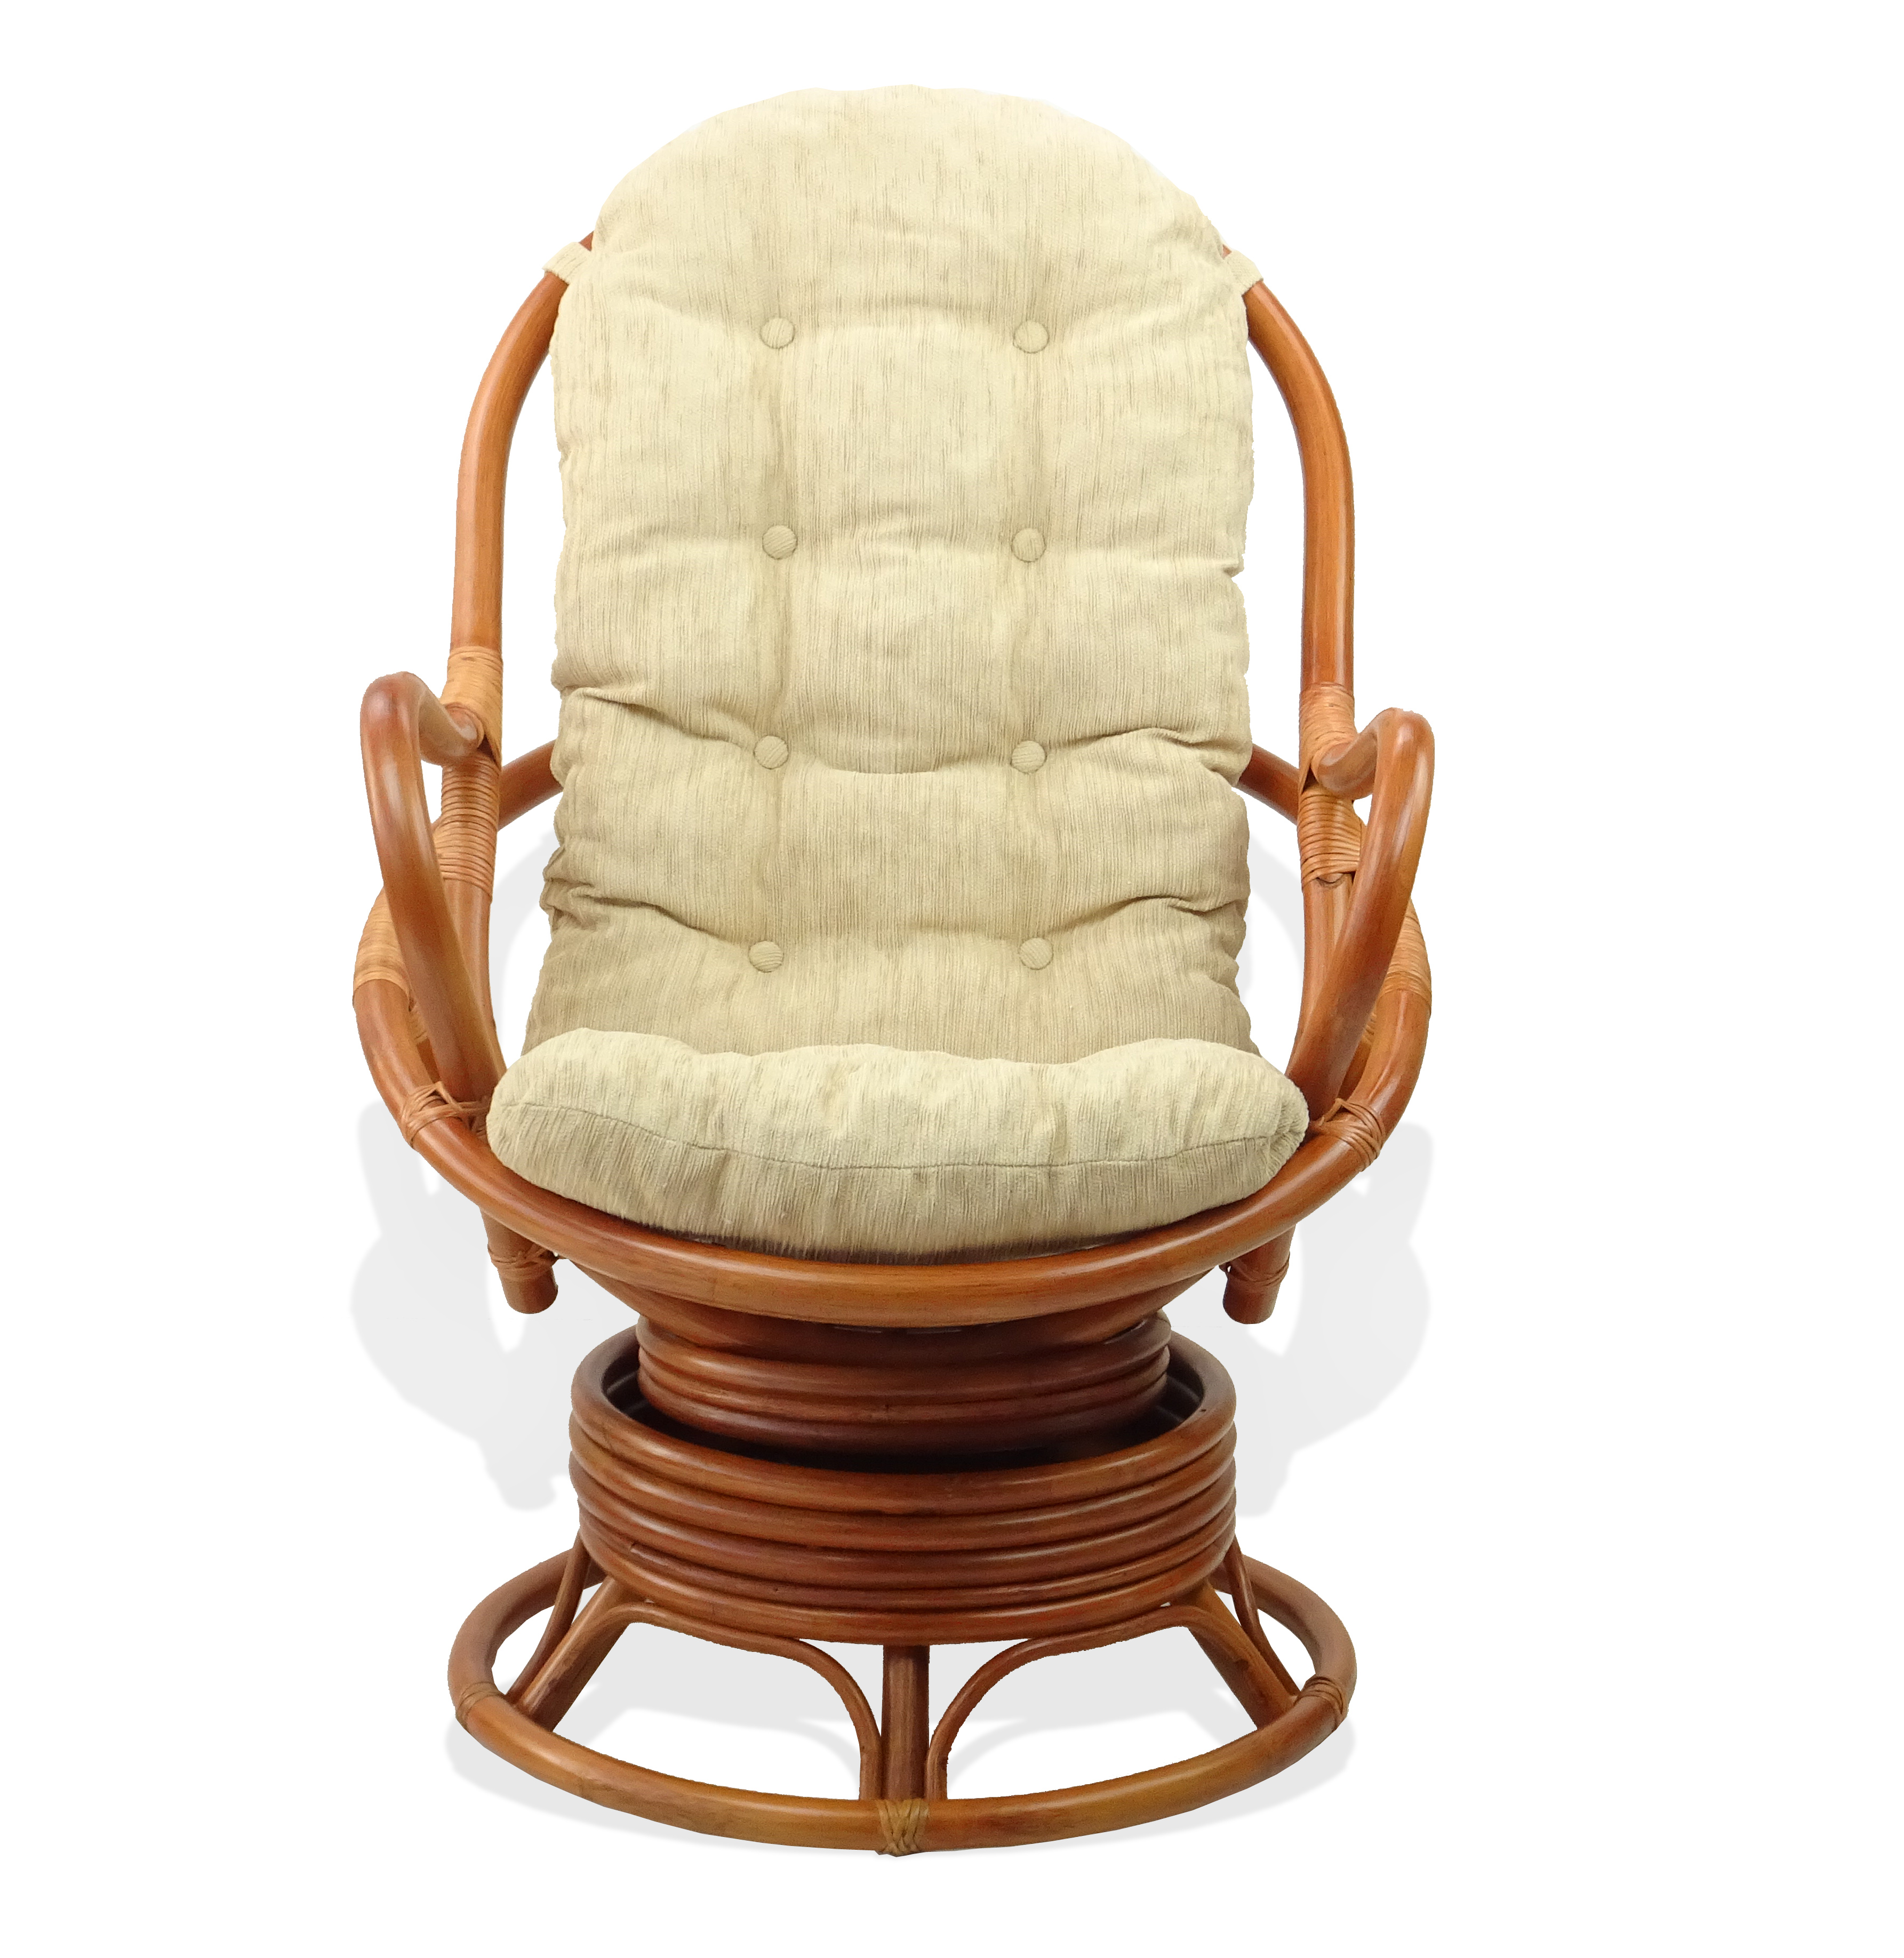 SK New Interiors Set of 2 Java Swivel Rocking Lounge Chair Natural Rattan Wicker with Cream Cushion and Round Coffee Table, Colonial - image 2 of 5